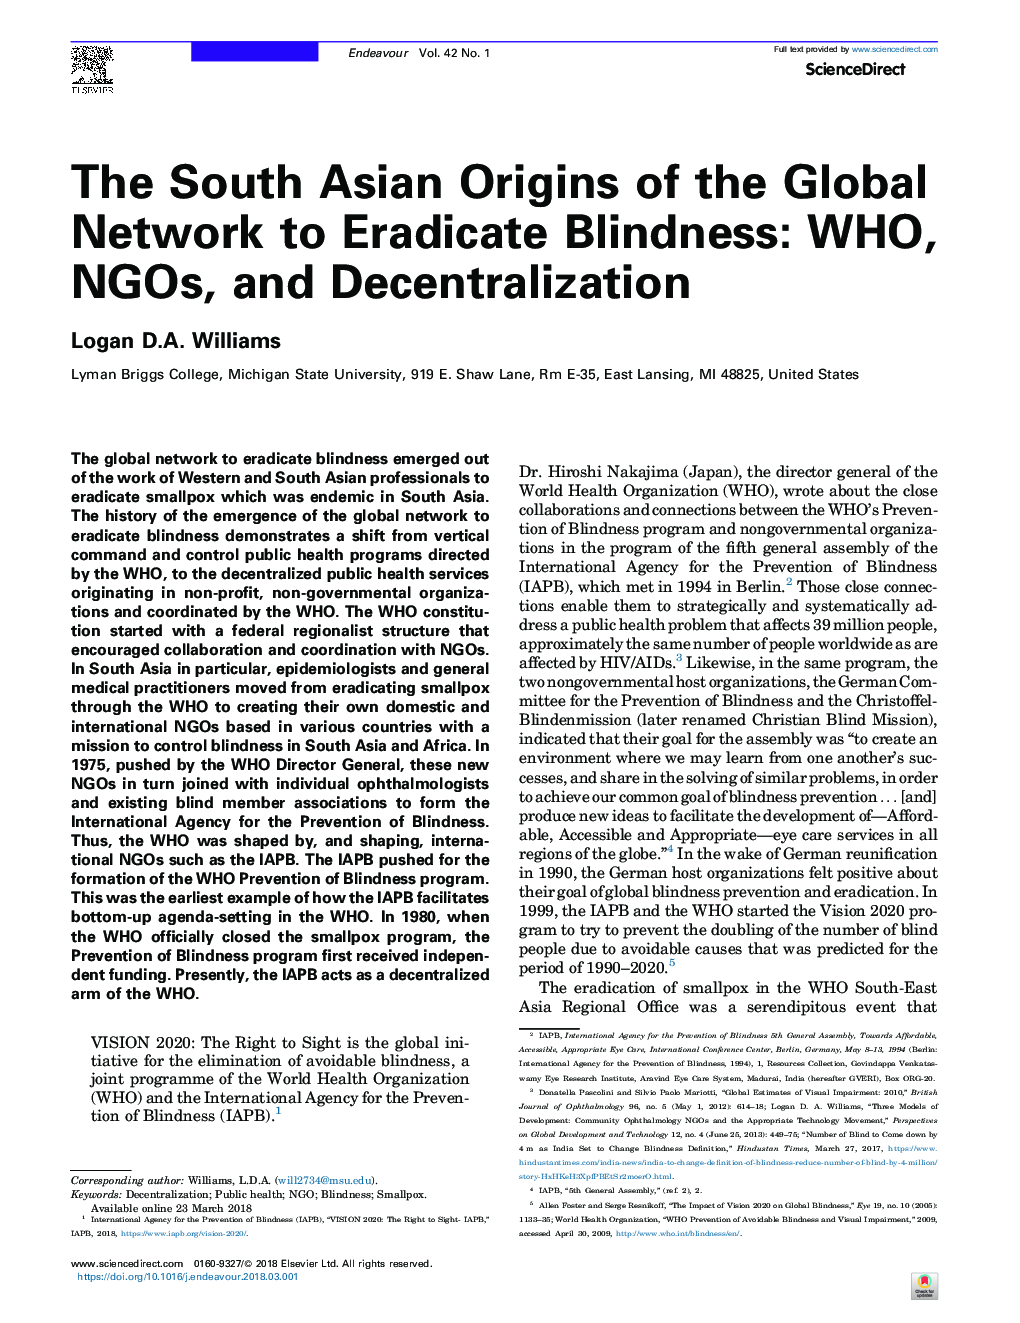 The South Asian Origins of the Global Network to Eradicate Blindness: WHO, NGOs, and Decentralization